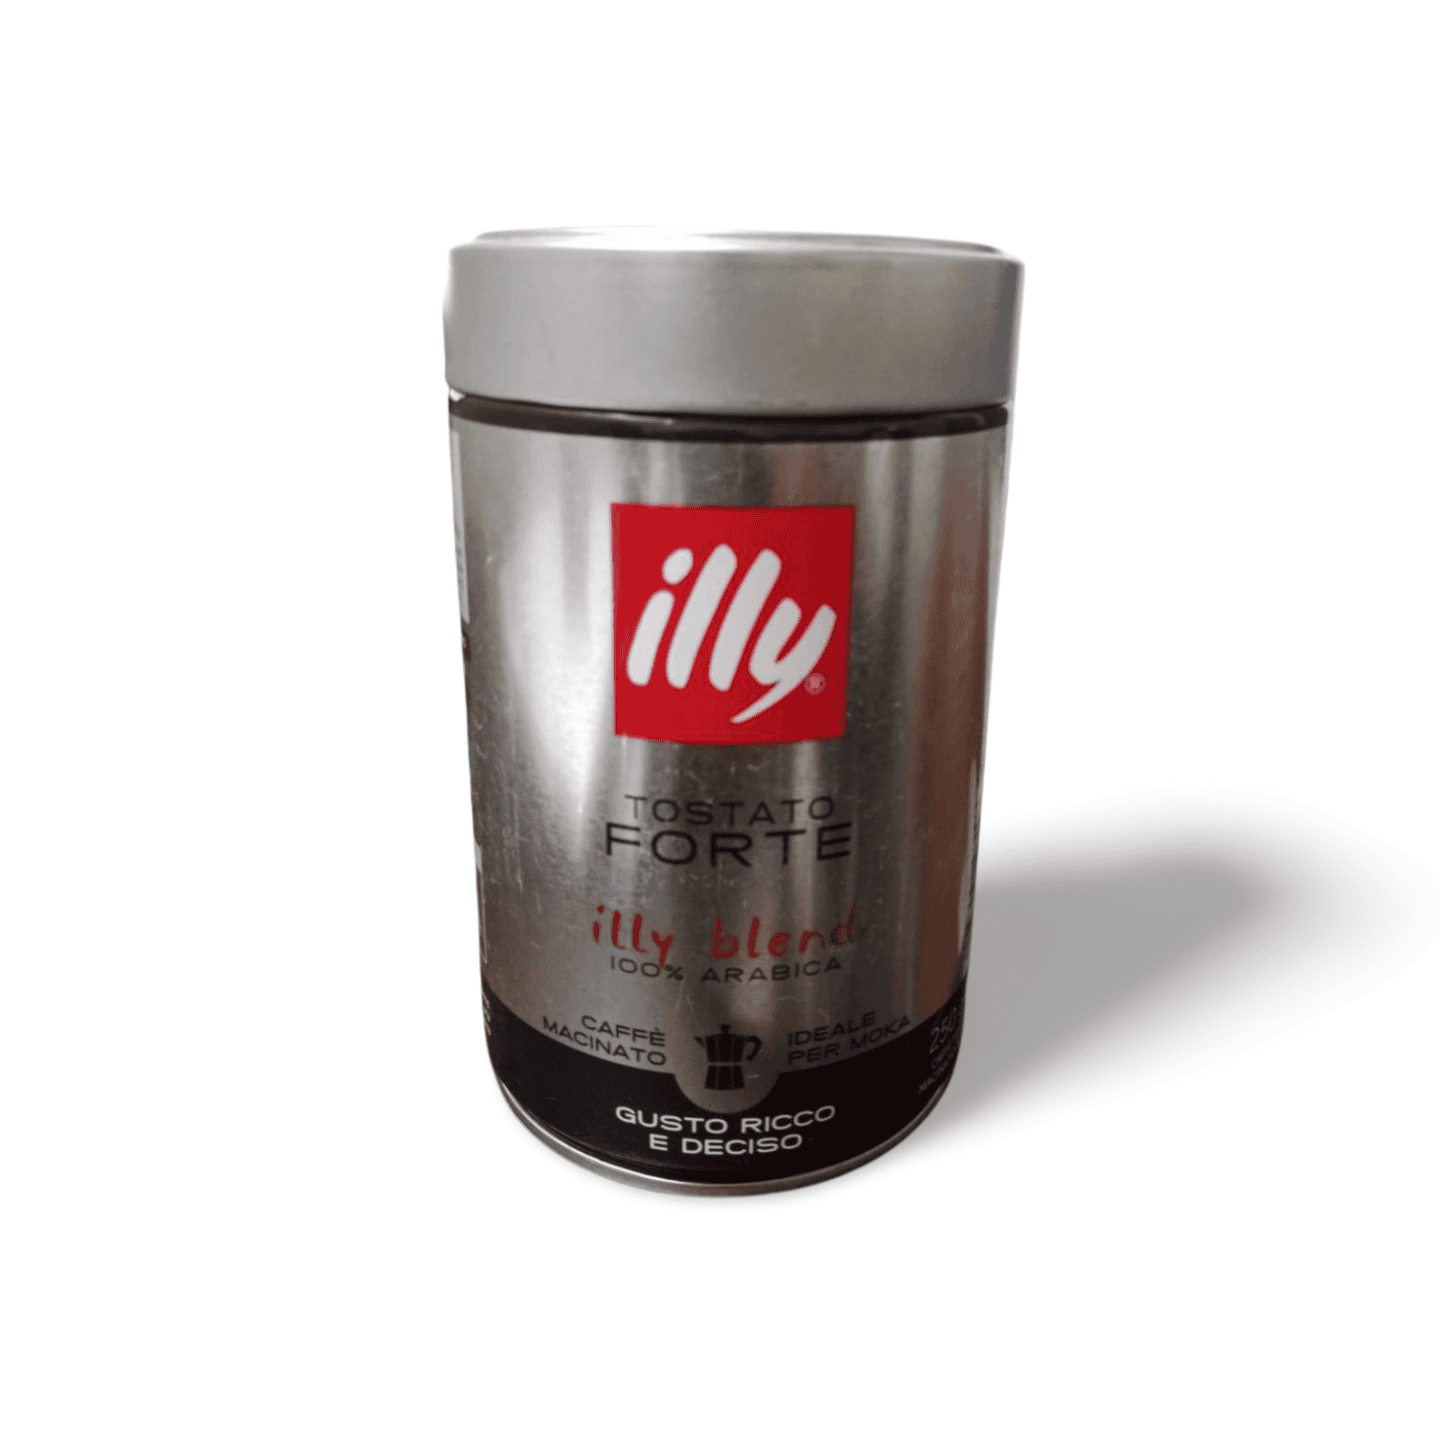 Illy Tostato Forte Price In Pakistan